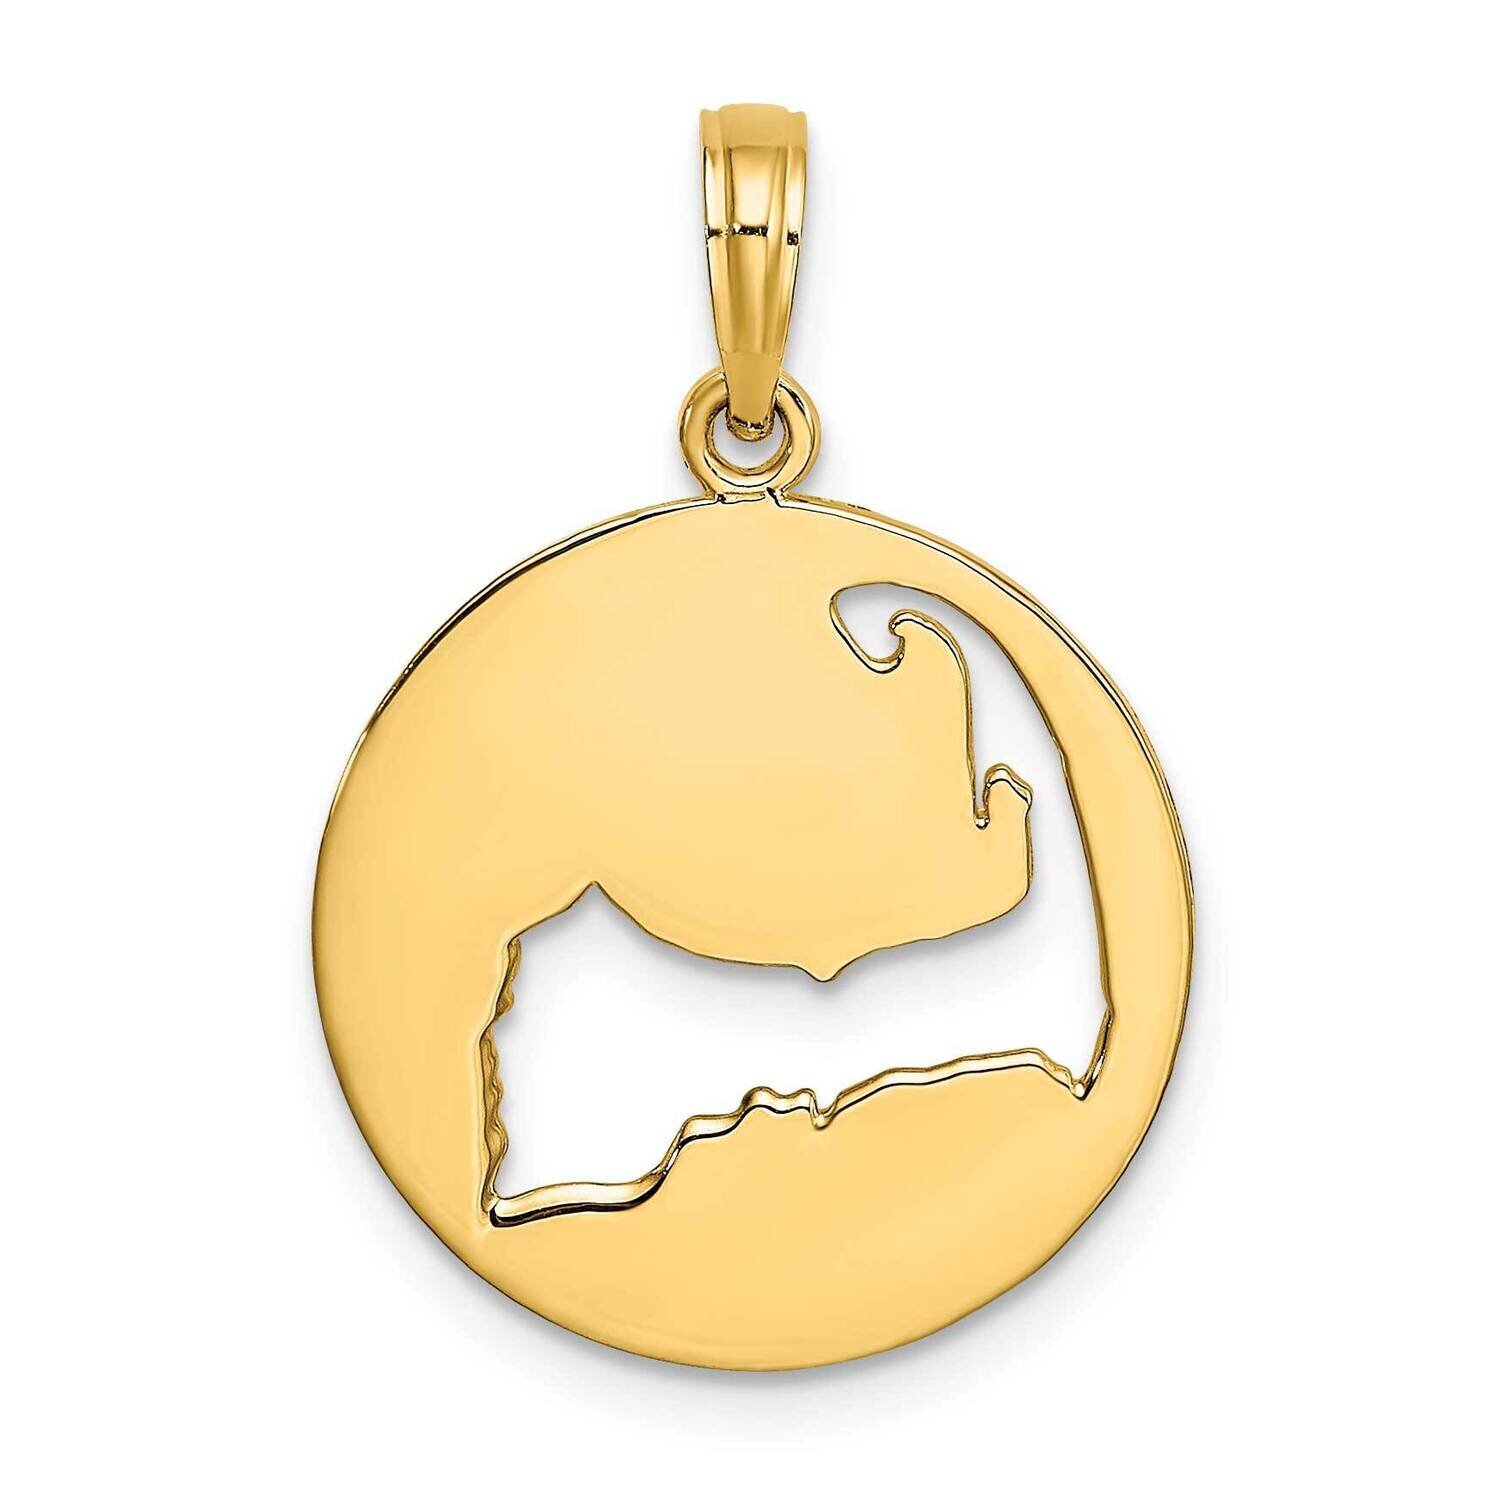 Cut-Out Cape Cod Silhouette Charm 14k Gold Polished K8782